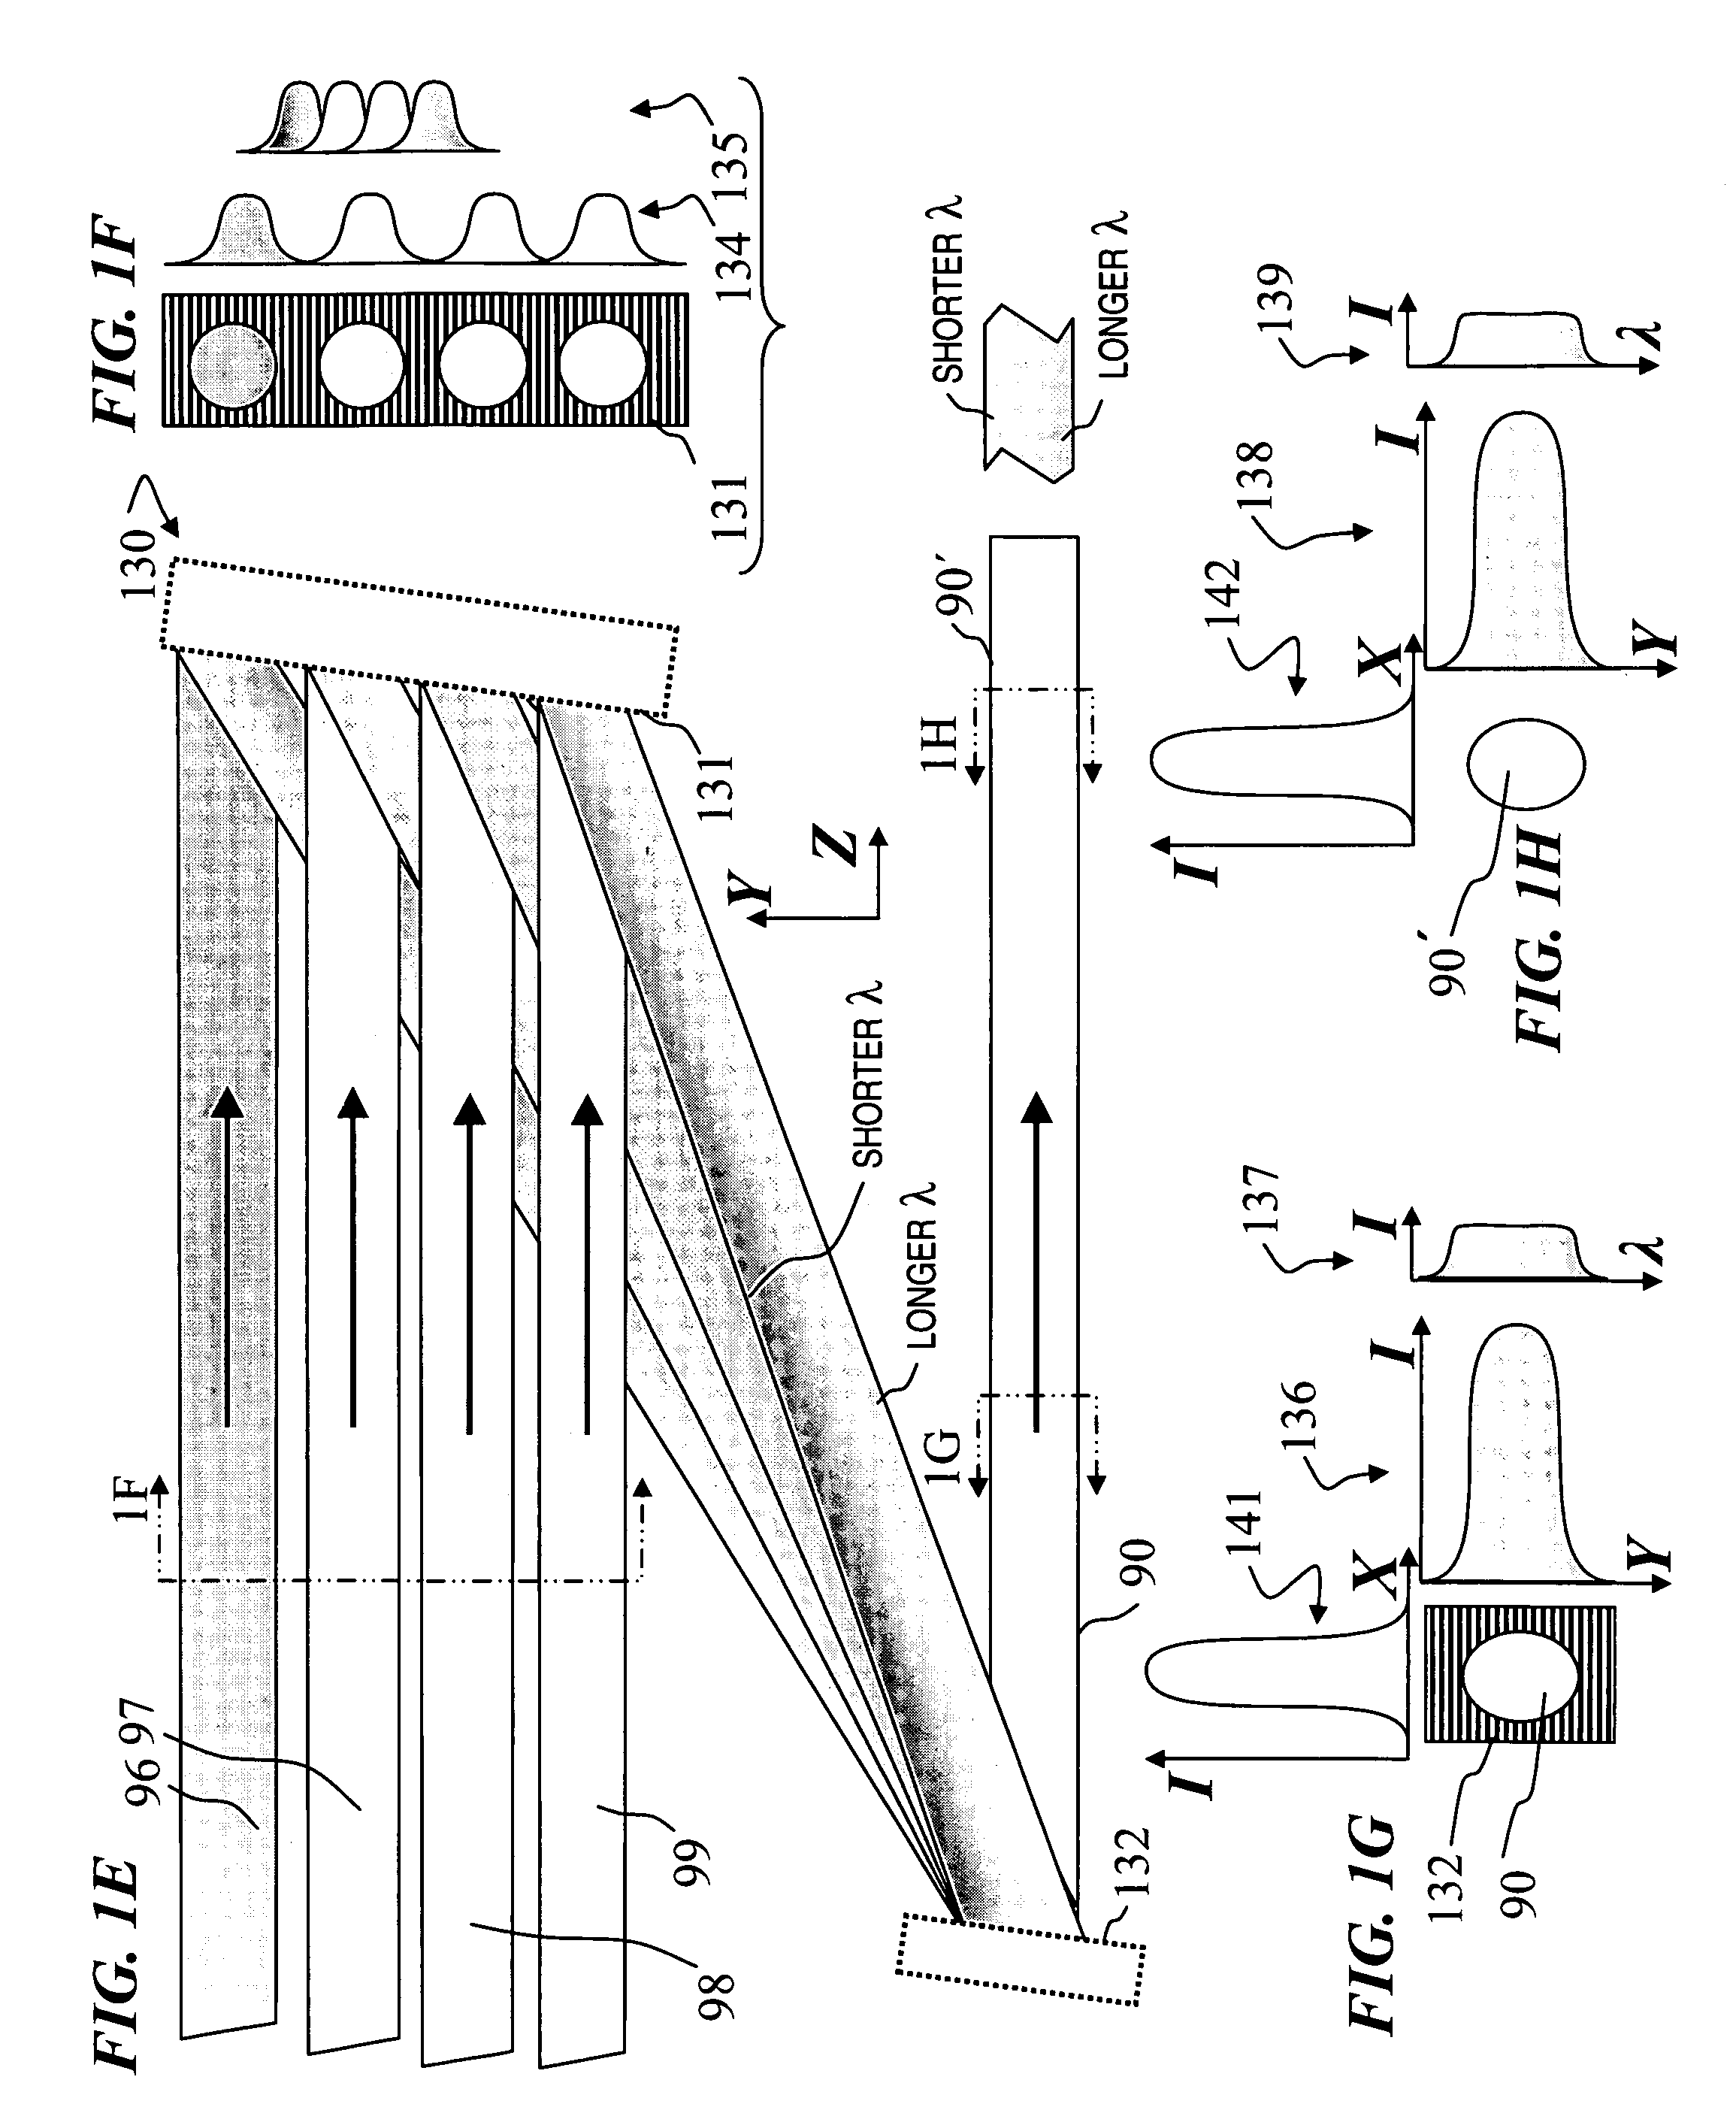 Method and apparatus for spectral-beam combining of high-power fiber lasers